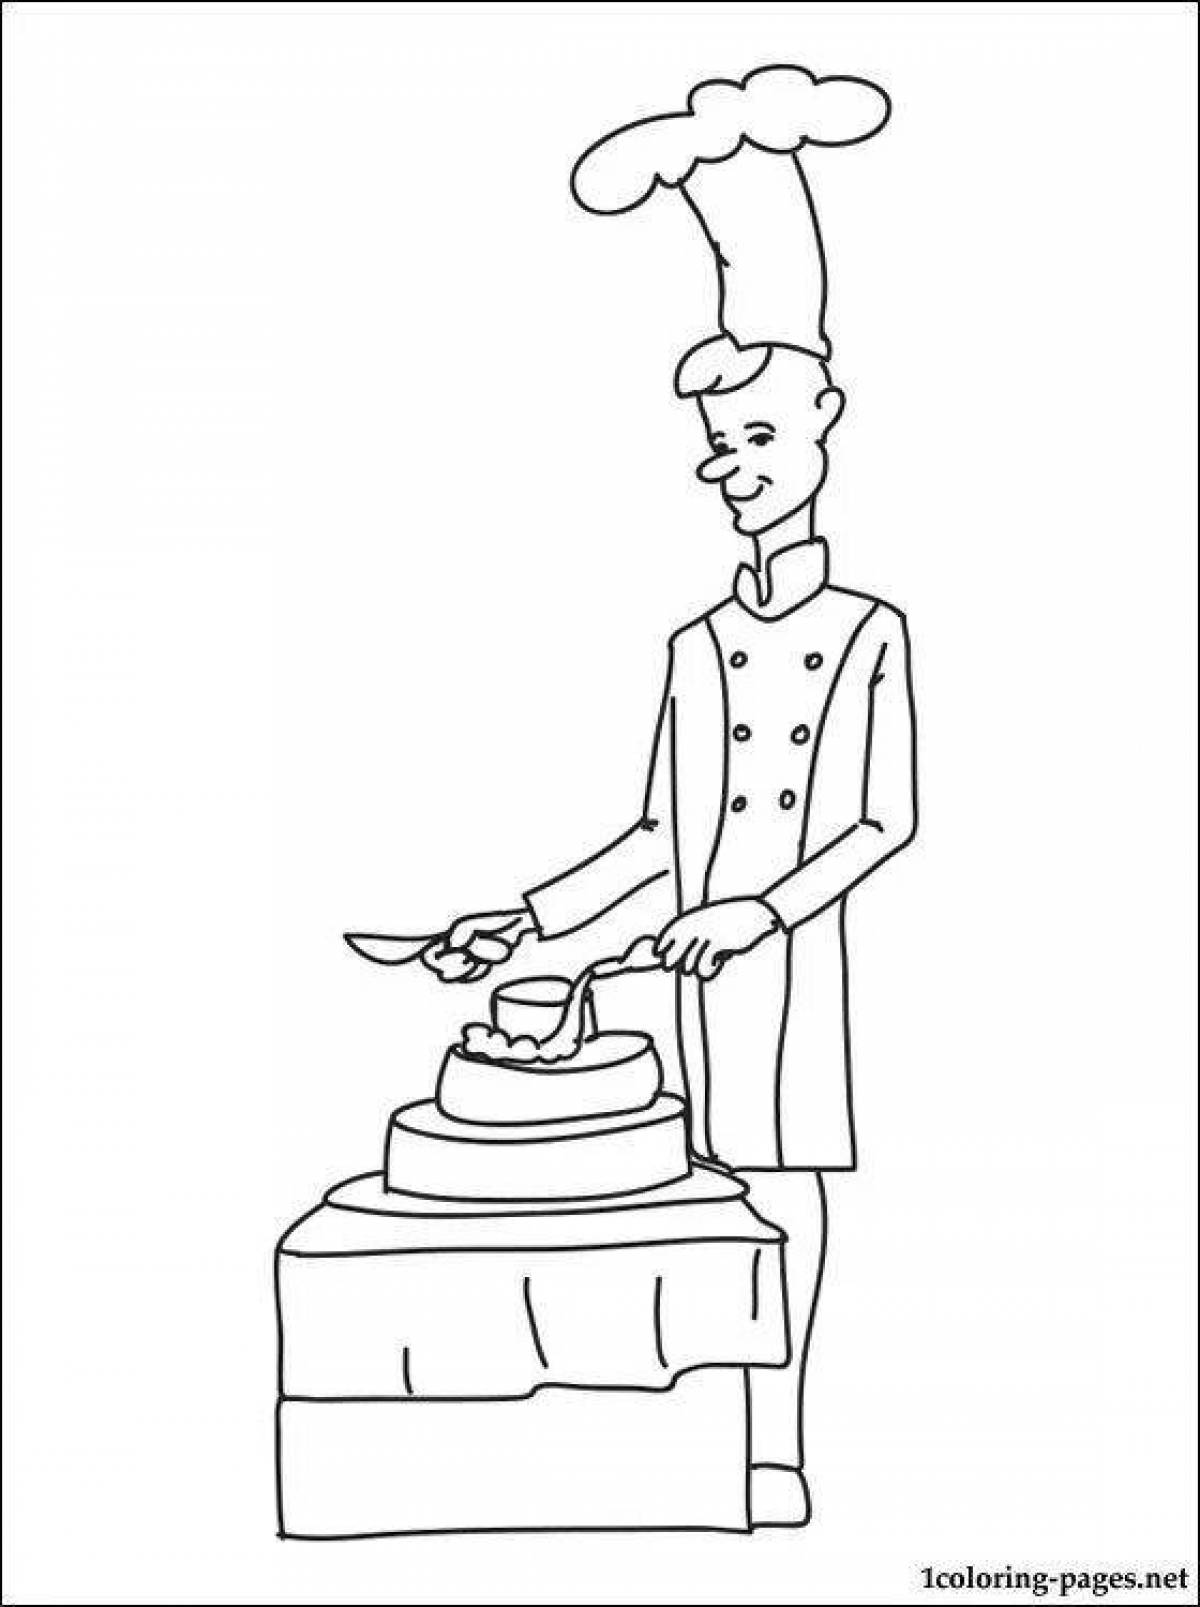 Coloring page confectioner with color filling